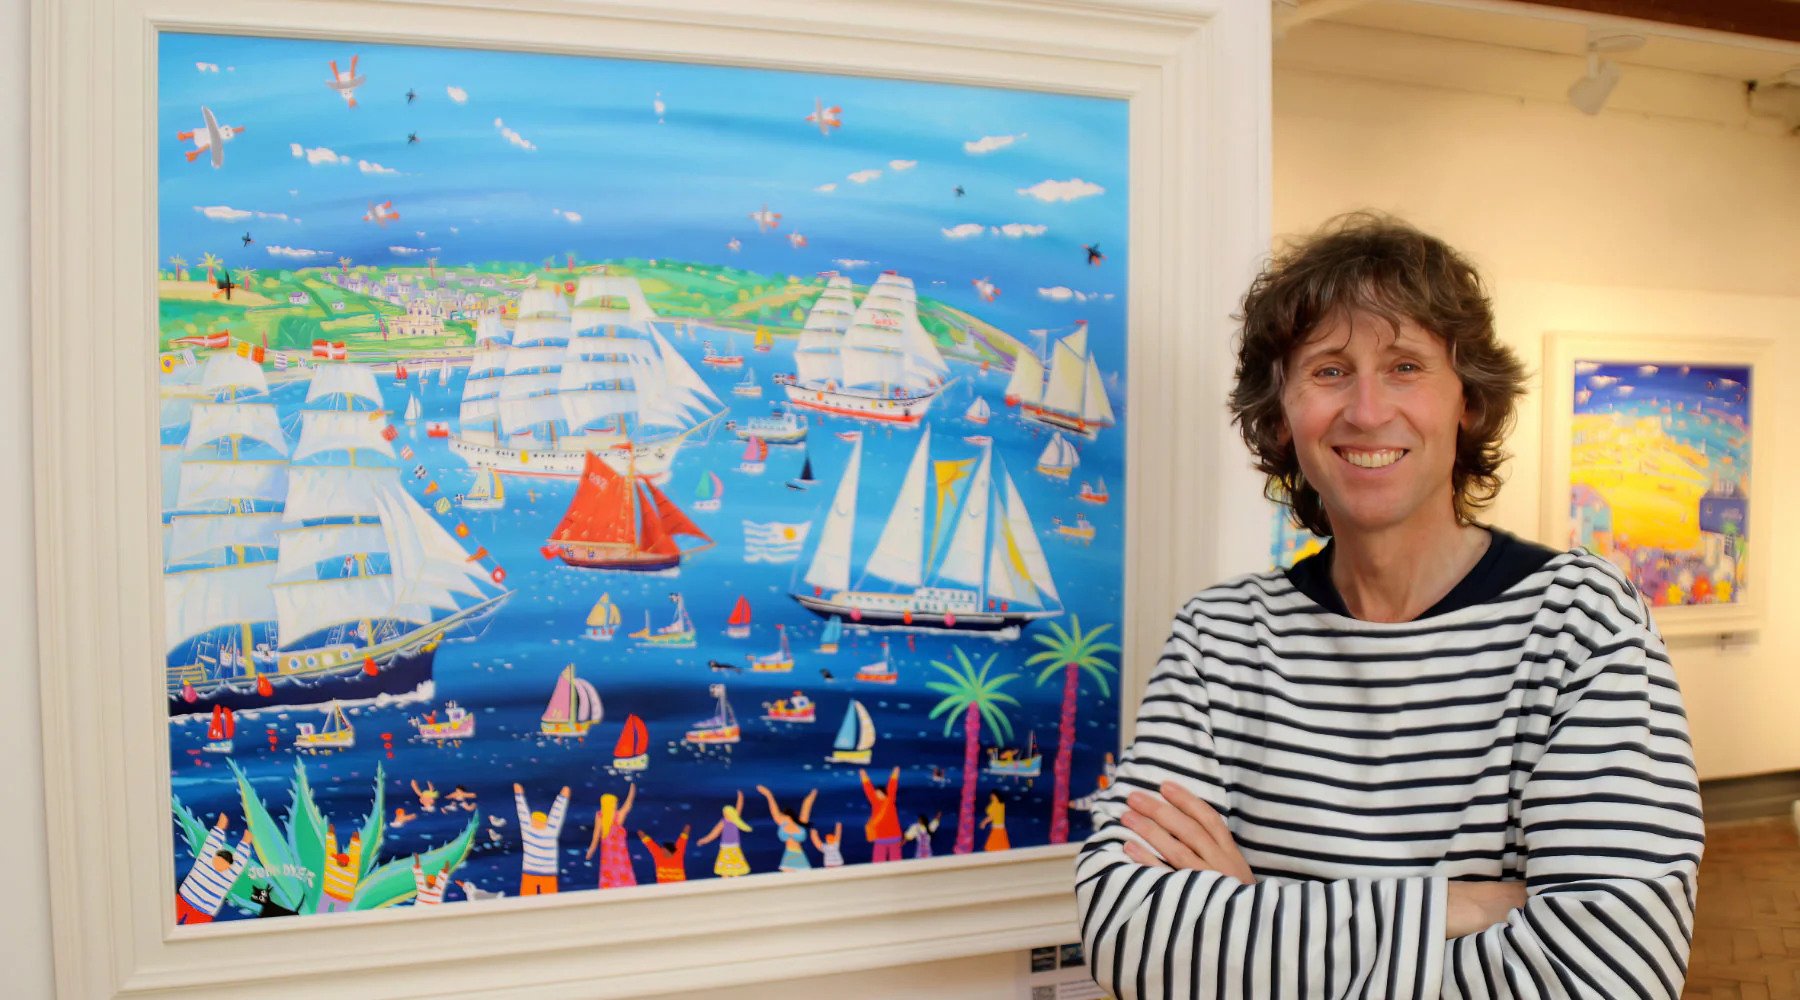 A photo of John Dyer, Artist in Residence for Tall Ships Races 2008, 2014 and 2023, at the unveiling of the official painting for 2023 ‘Tall Ships and Small Ships’. John has curly brown hair and is wearing a white and navy striped long-sleeve shirt. He is standing in front of his large framed original painting, which features a colourful scene of tall ships in Falmouth Bay.